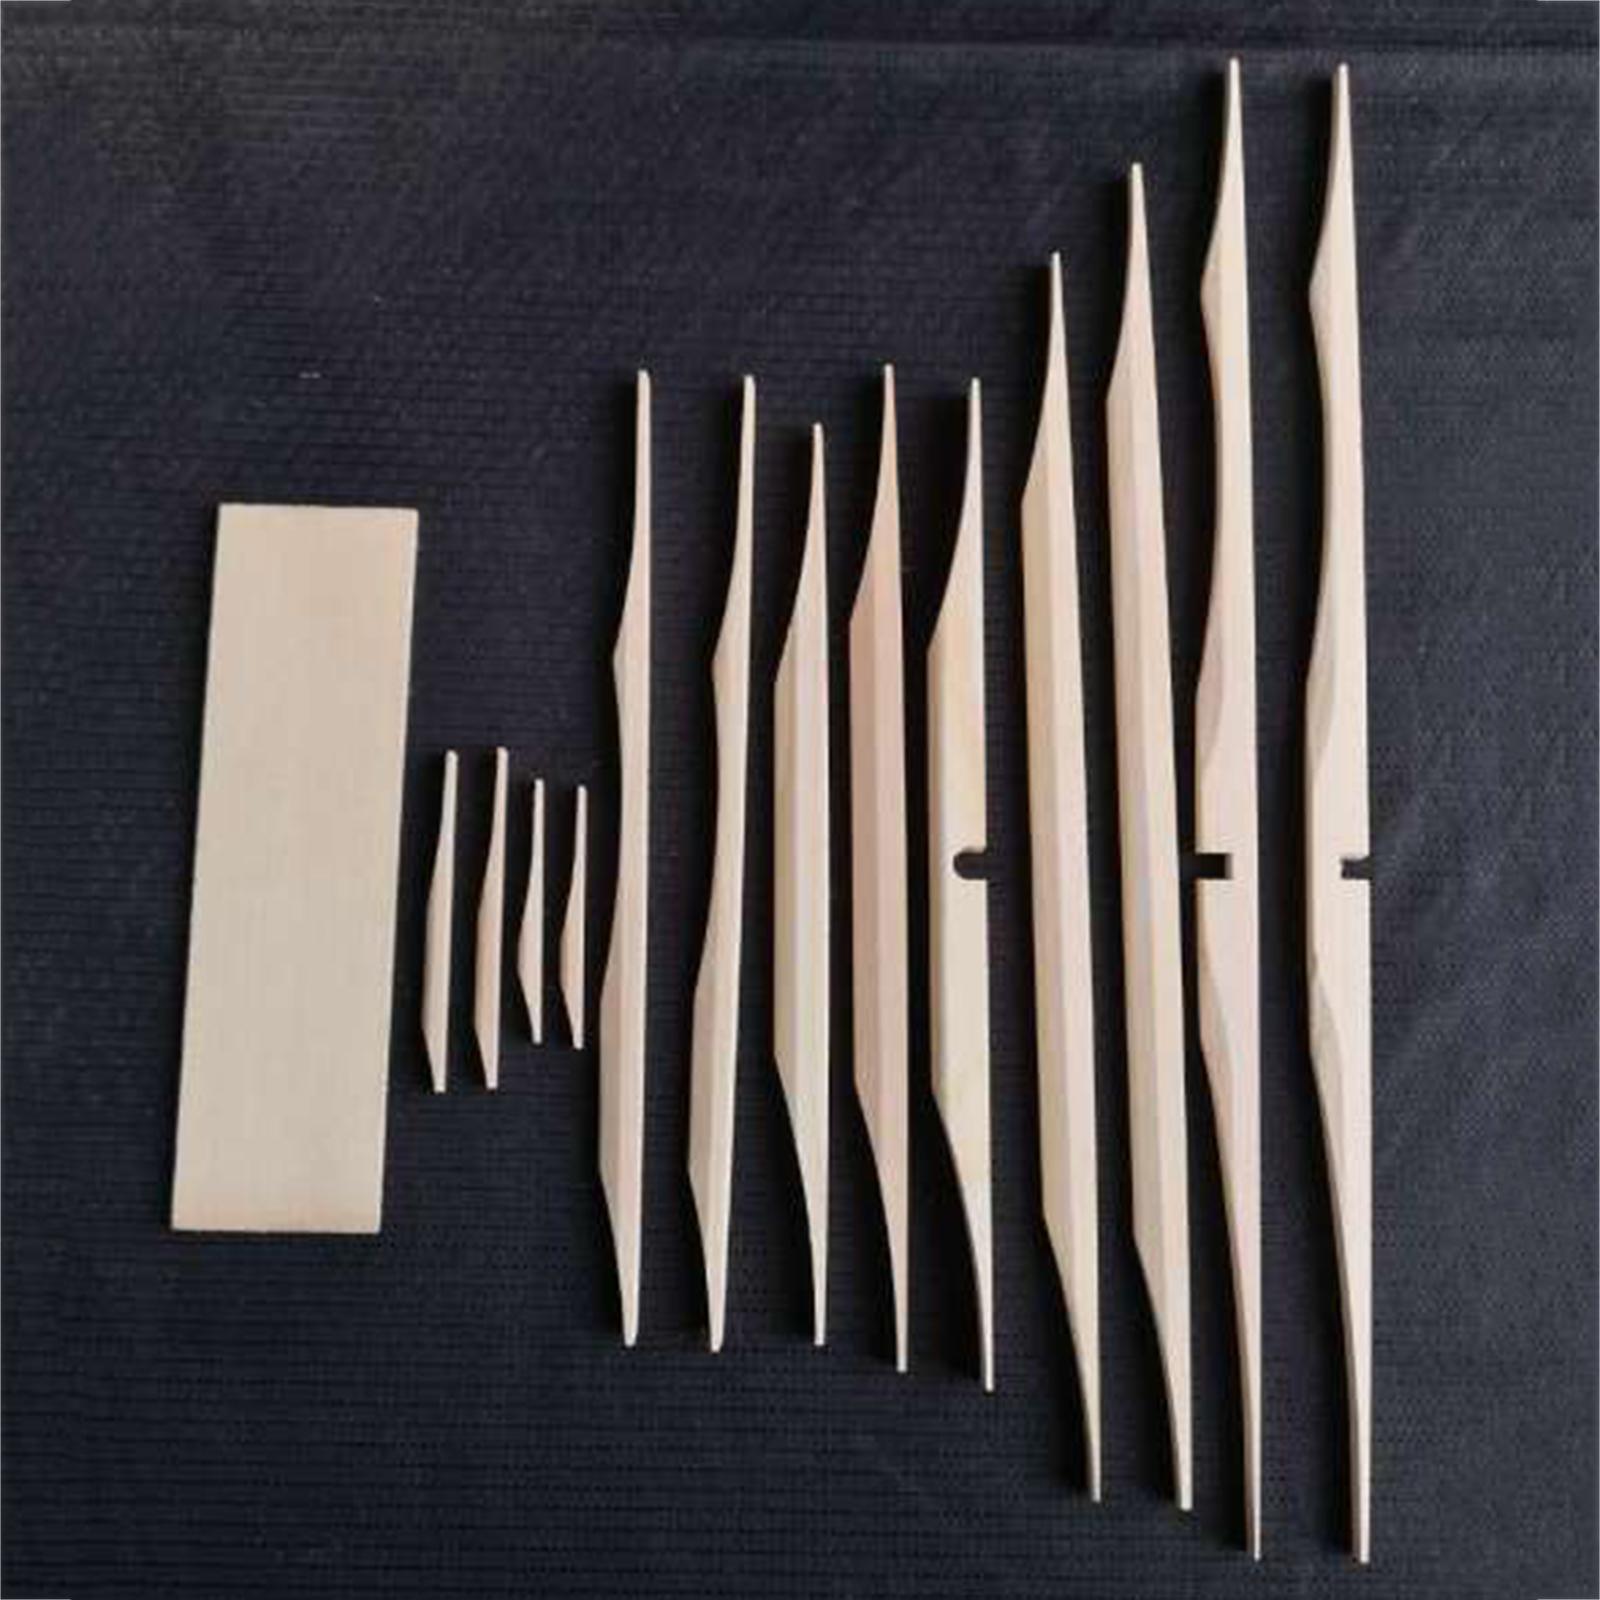 24Pcs Guitar Spruce Brace Kit Tools Accessories Luthier Wooden DIY Tools